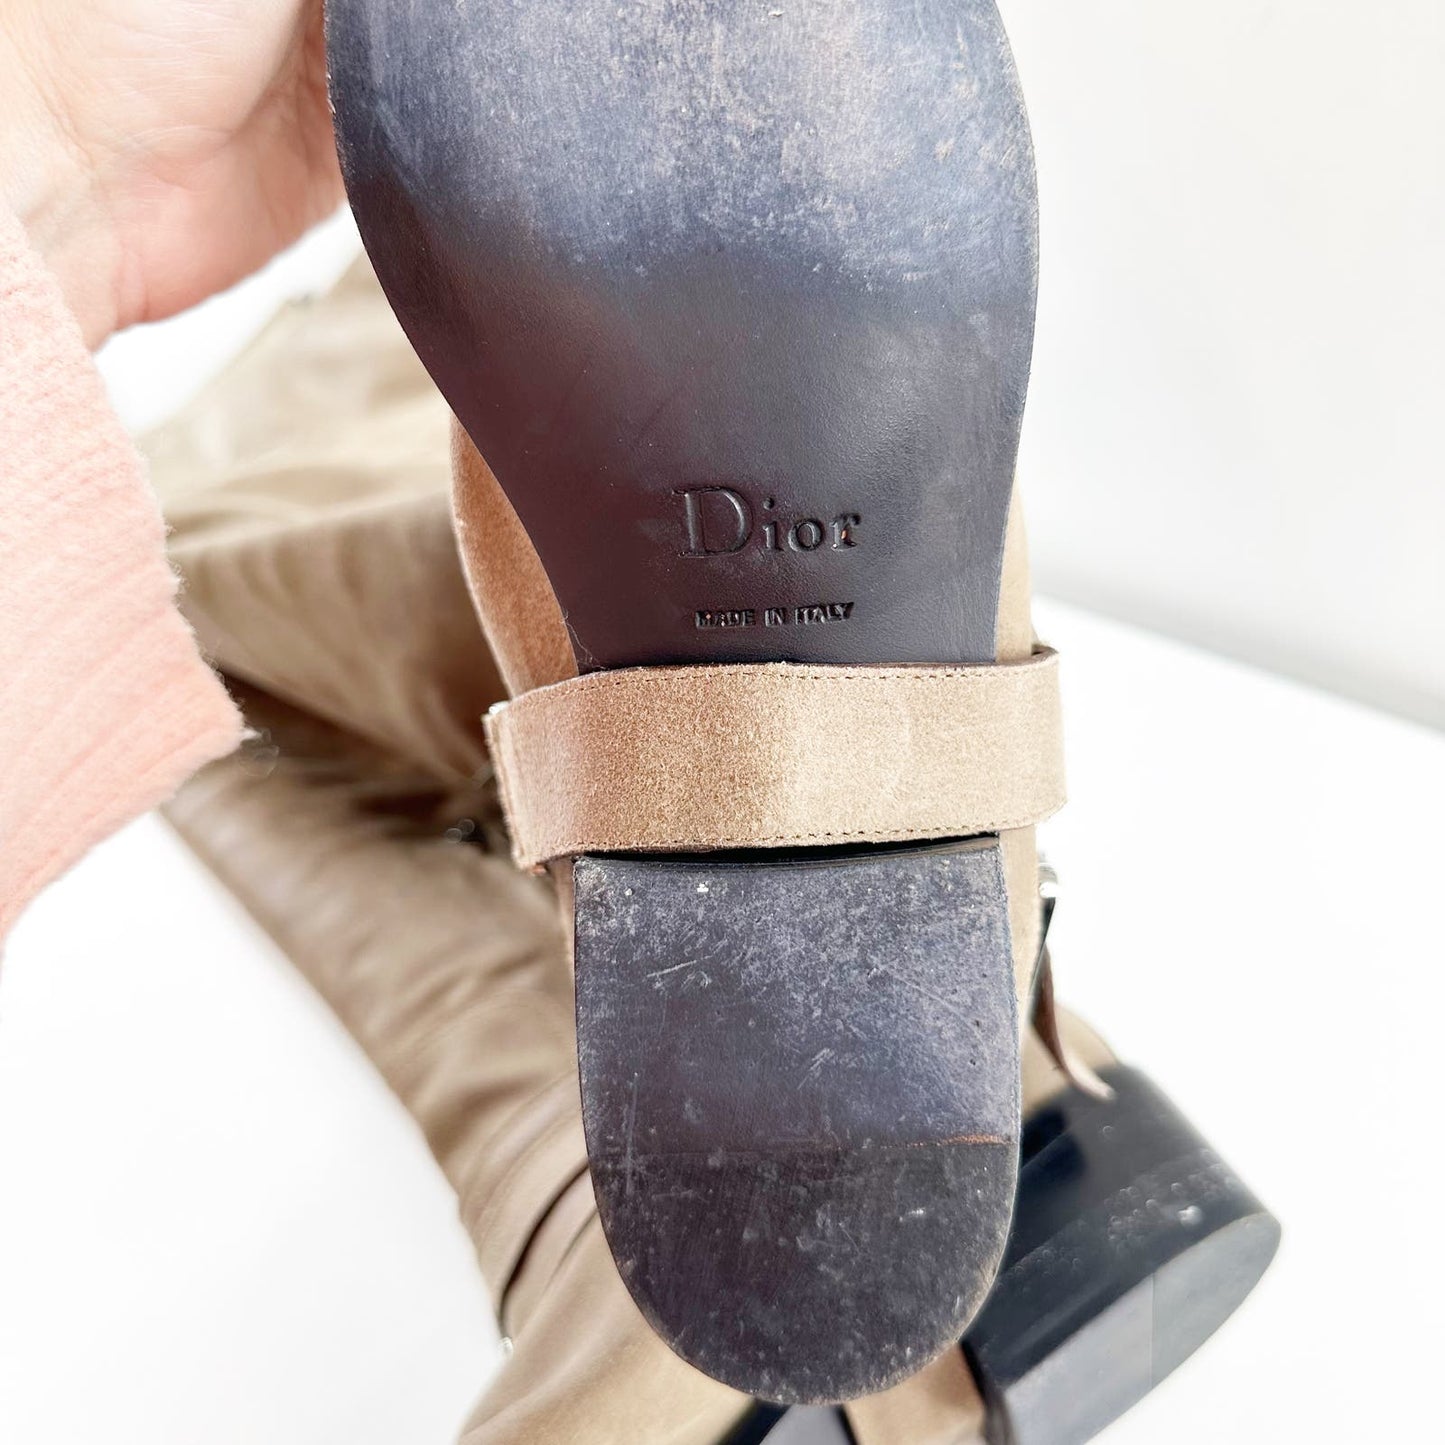 Christian Dior Over The Knee OTK Suede Harness Riding Boots Tan 38 / US 8